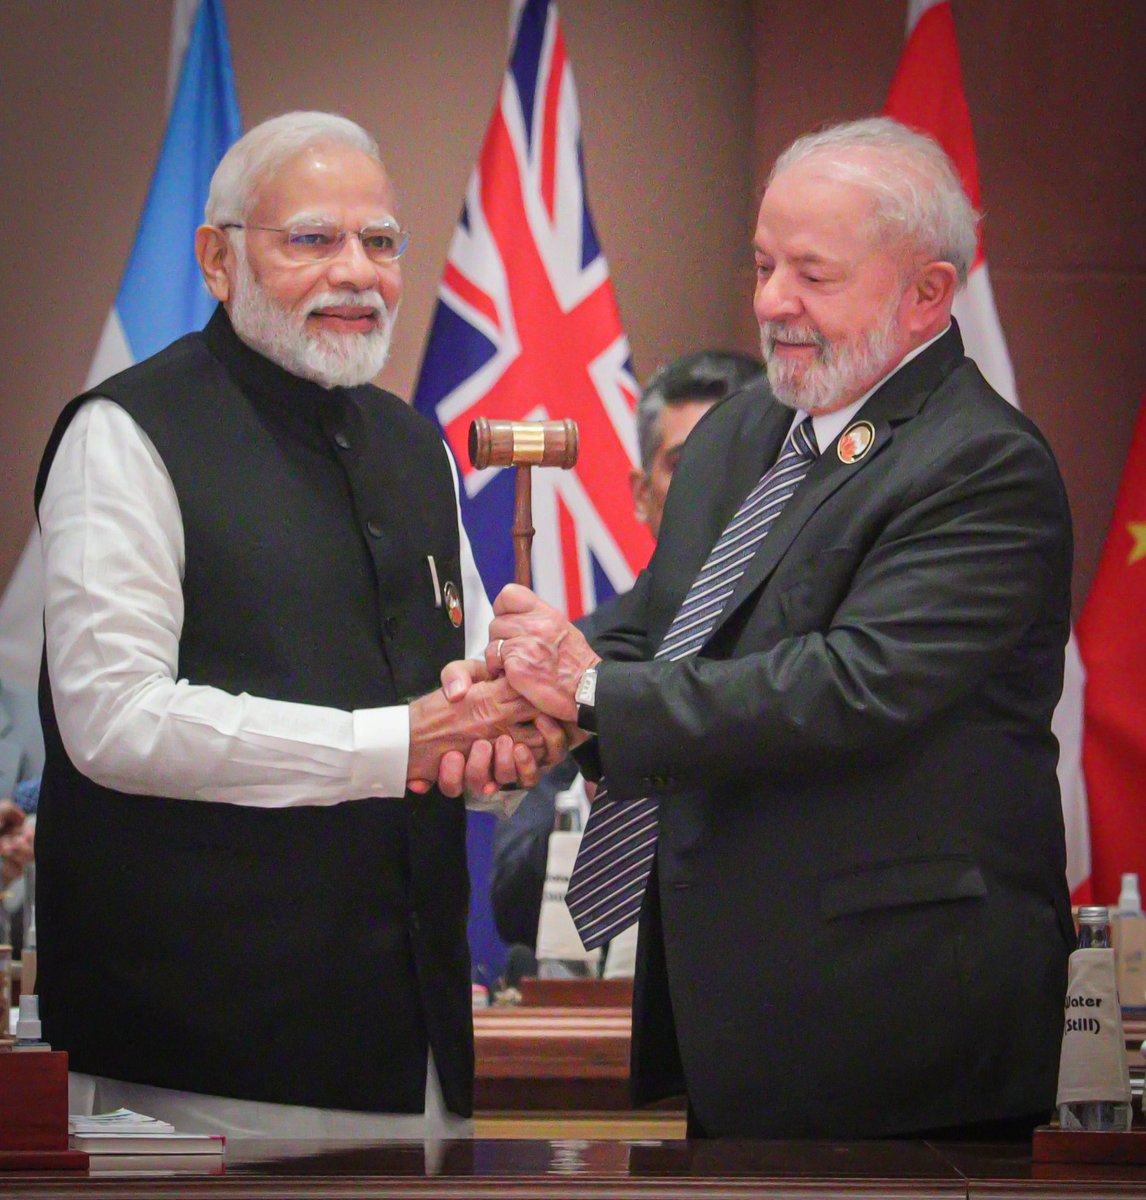 From New Delhi to Brasília! PM @narendramodi handed over the gavel to the President @LulaOficial of Brazil as the next holder of the #G20 Presidency. #G20India